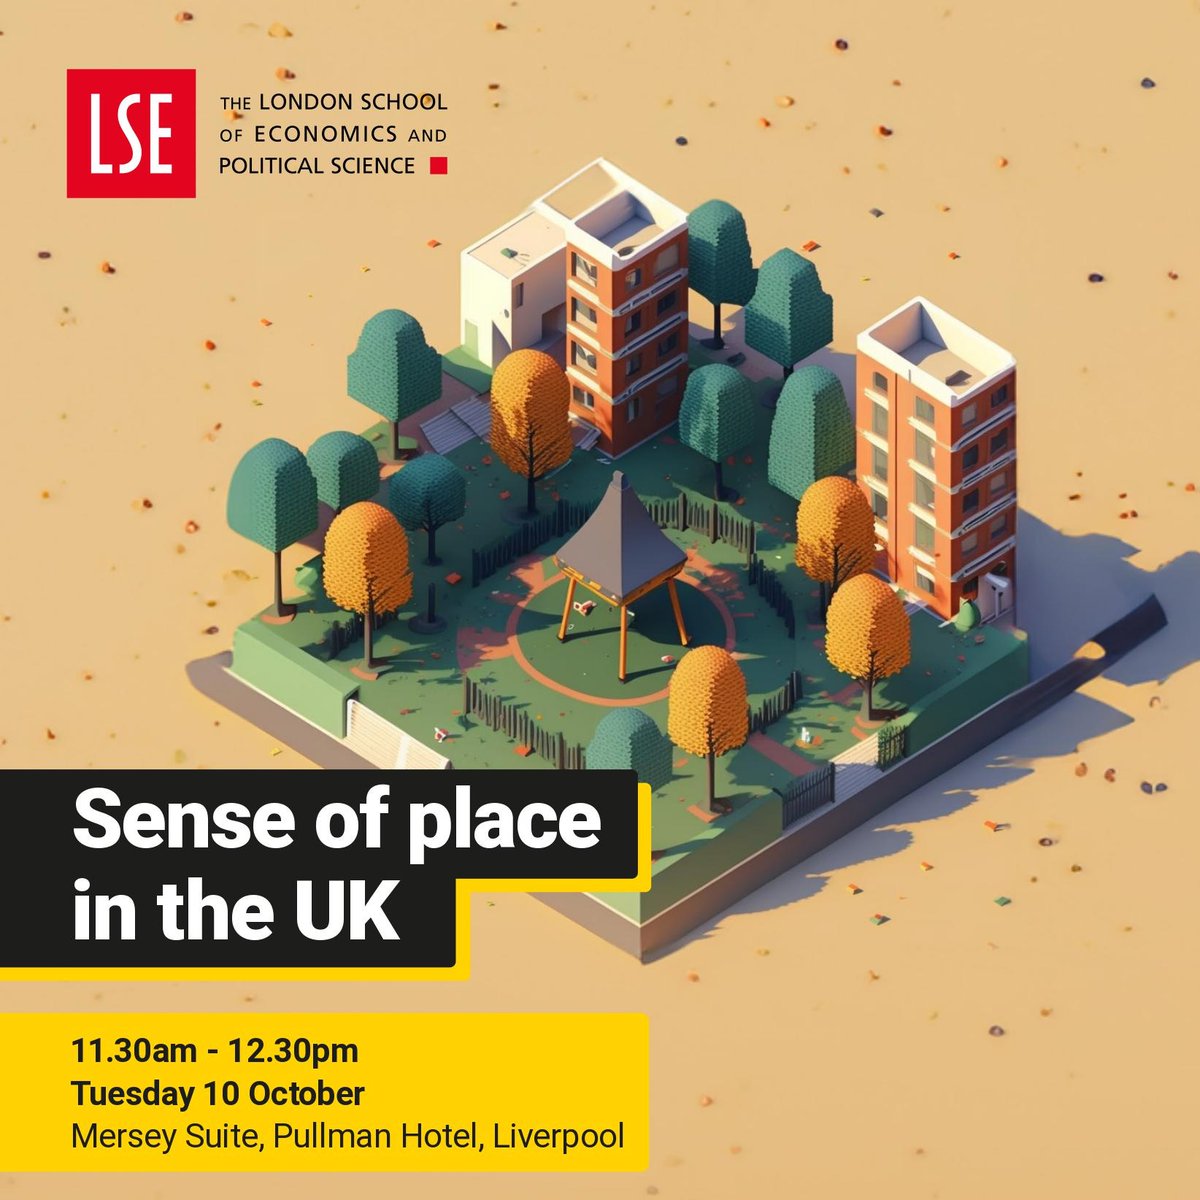 How can #Labour build better public places for future generations? Join our fantastic LSE panel with speakers including @lucianaberger, @VictoriaRTPI & @SharonStevenage at #LabourPartyConference 📍 Tuesday from 11.30am – 12.30pm, Mersey Suite, Pullman Hotel.